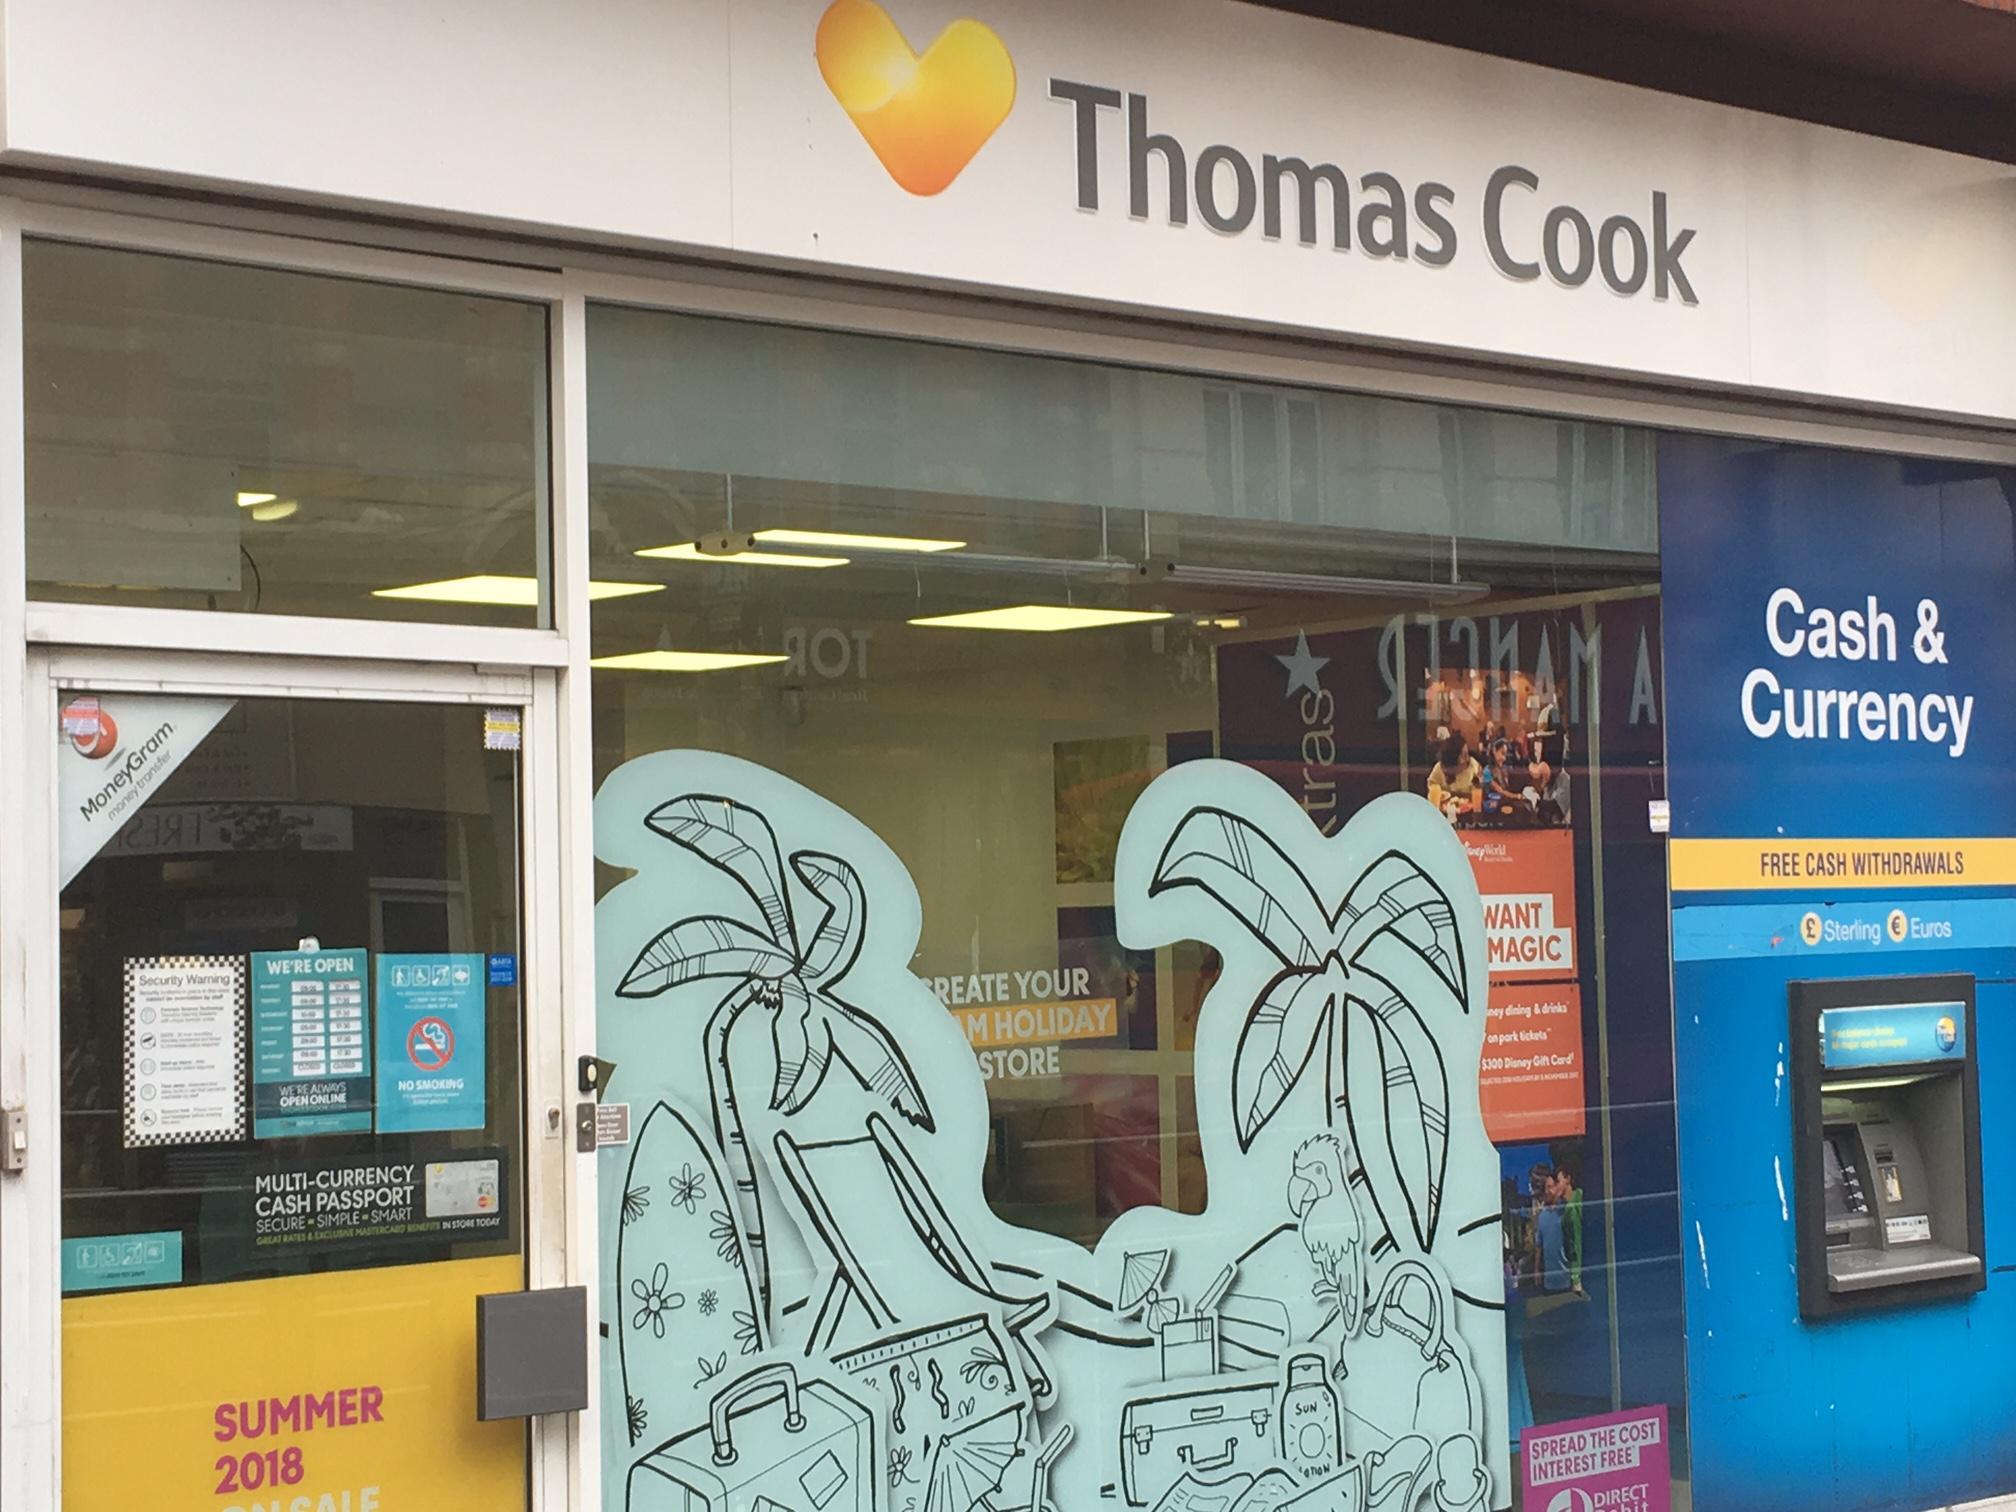 Thomas Cook has seen a decline in footfall to its stores